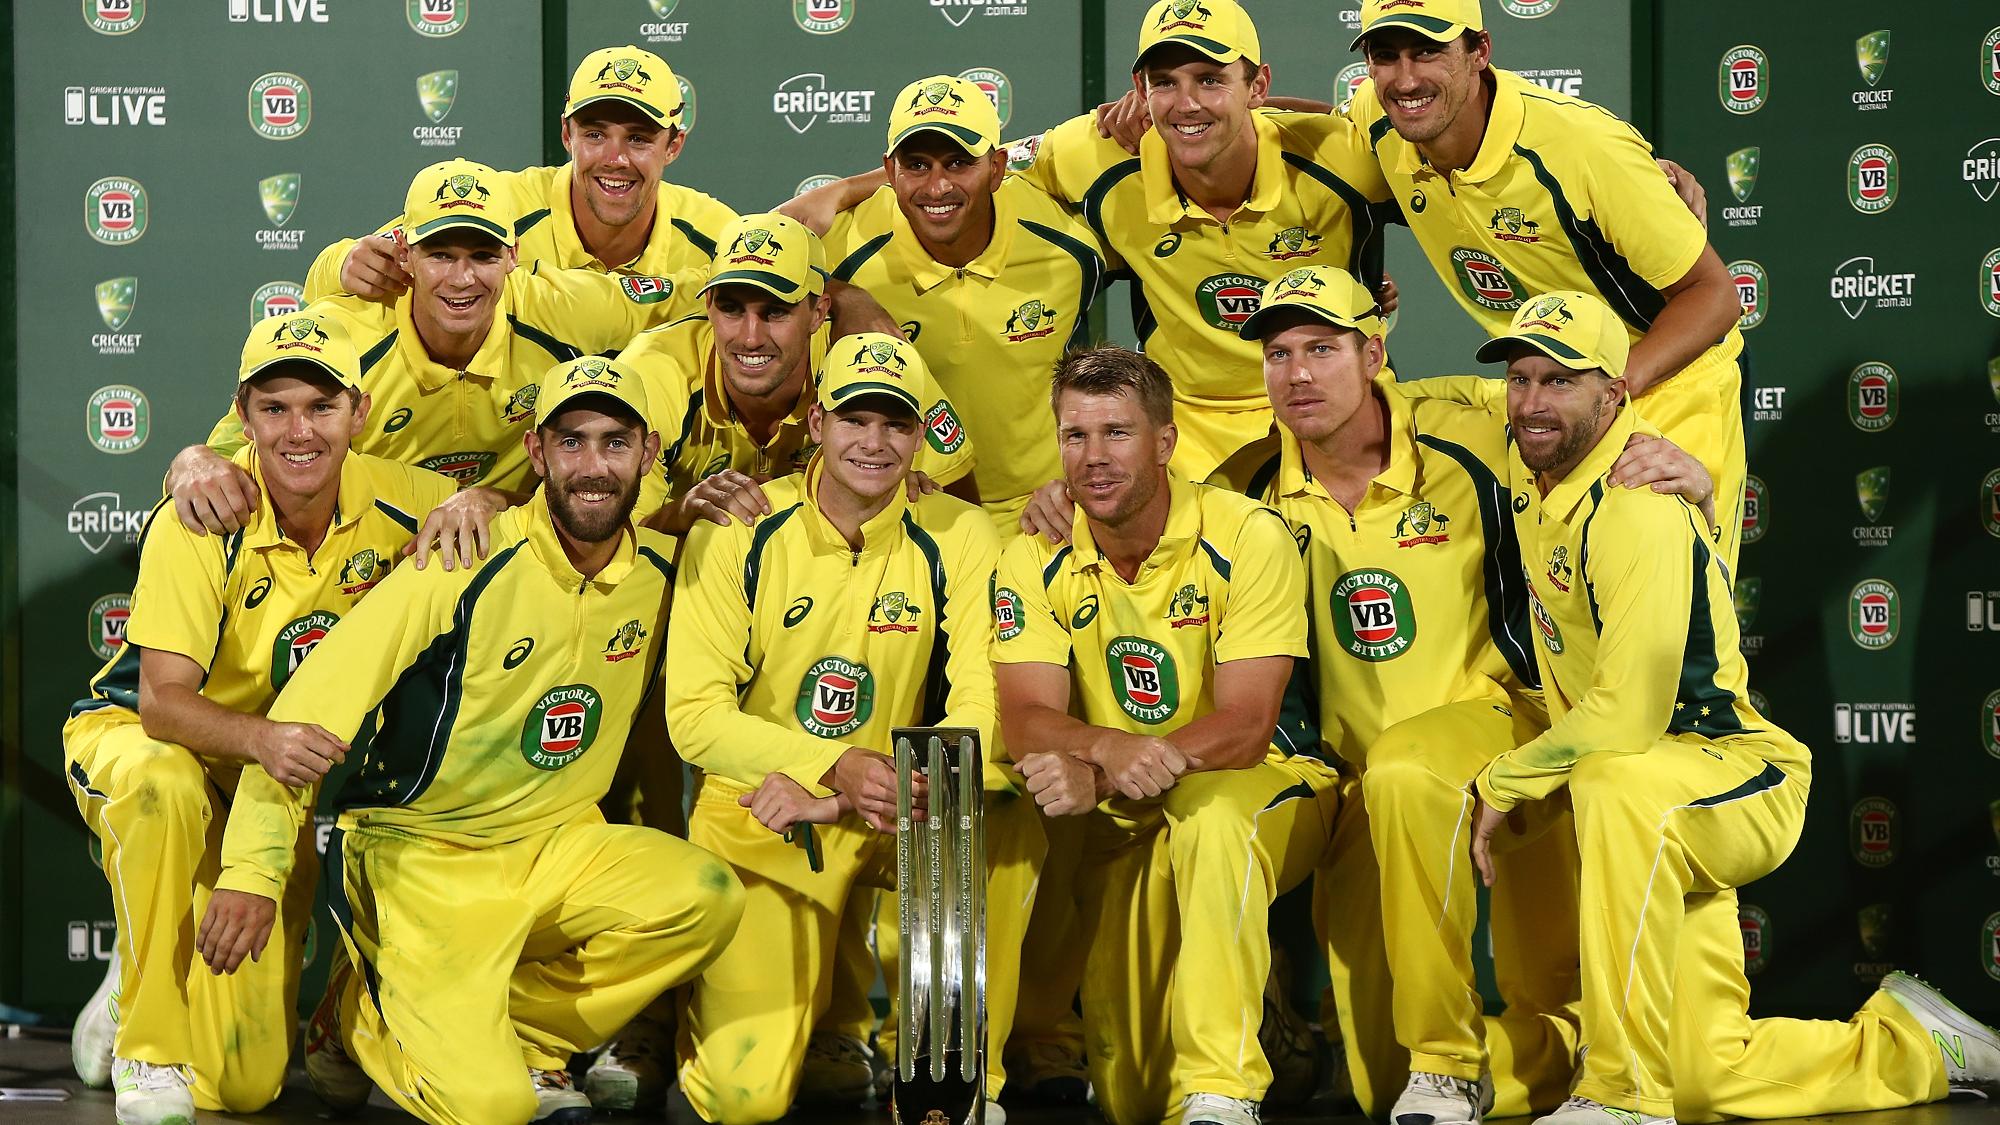 Australia displaced Pakistan in ICC ranking for T20 teams